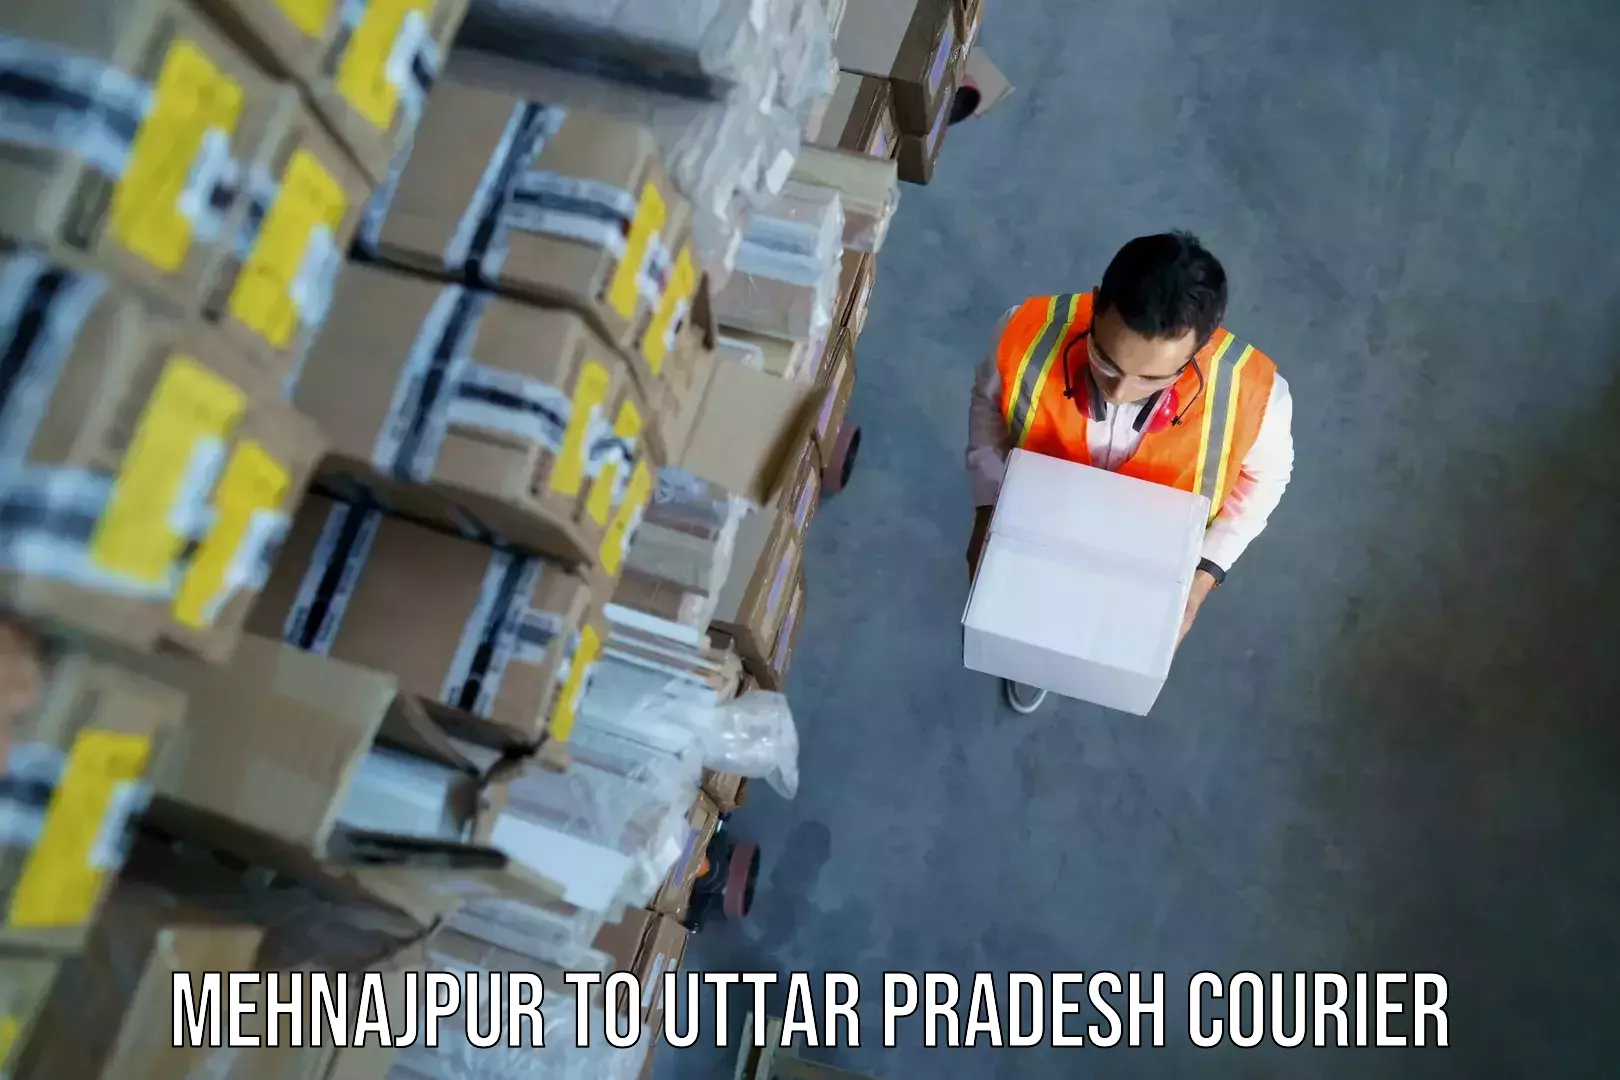 Baggage shipping service Mehnajpur to Kanth